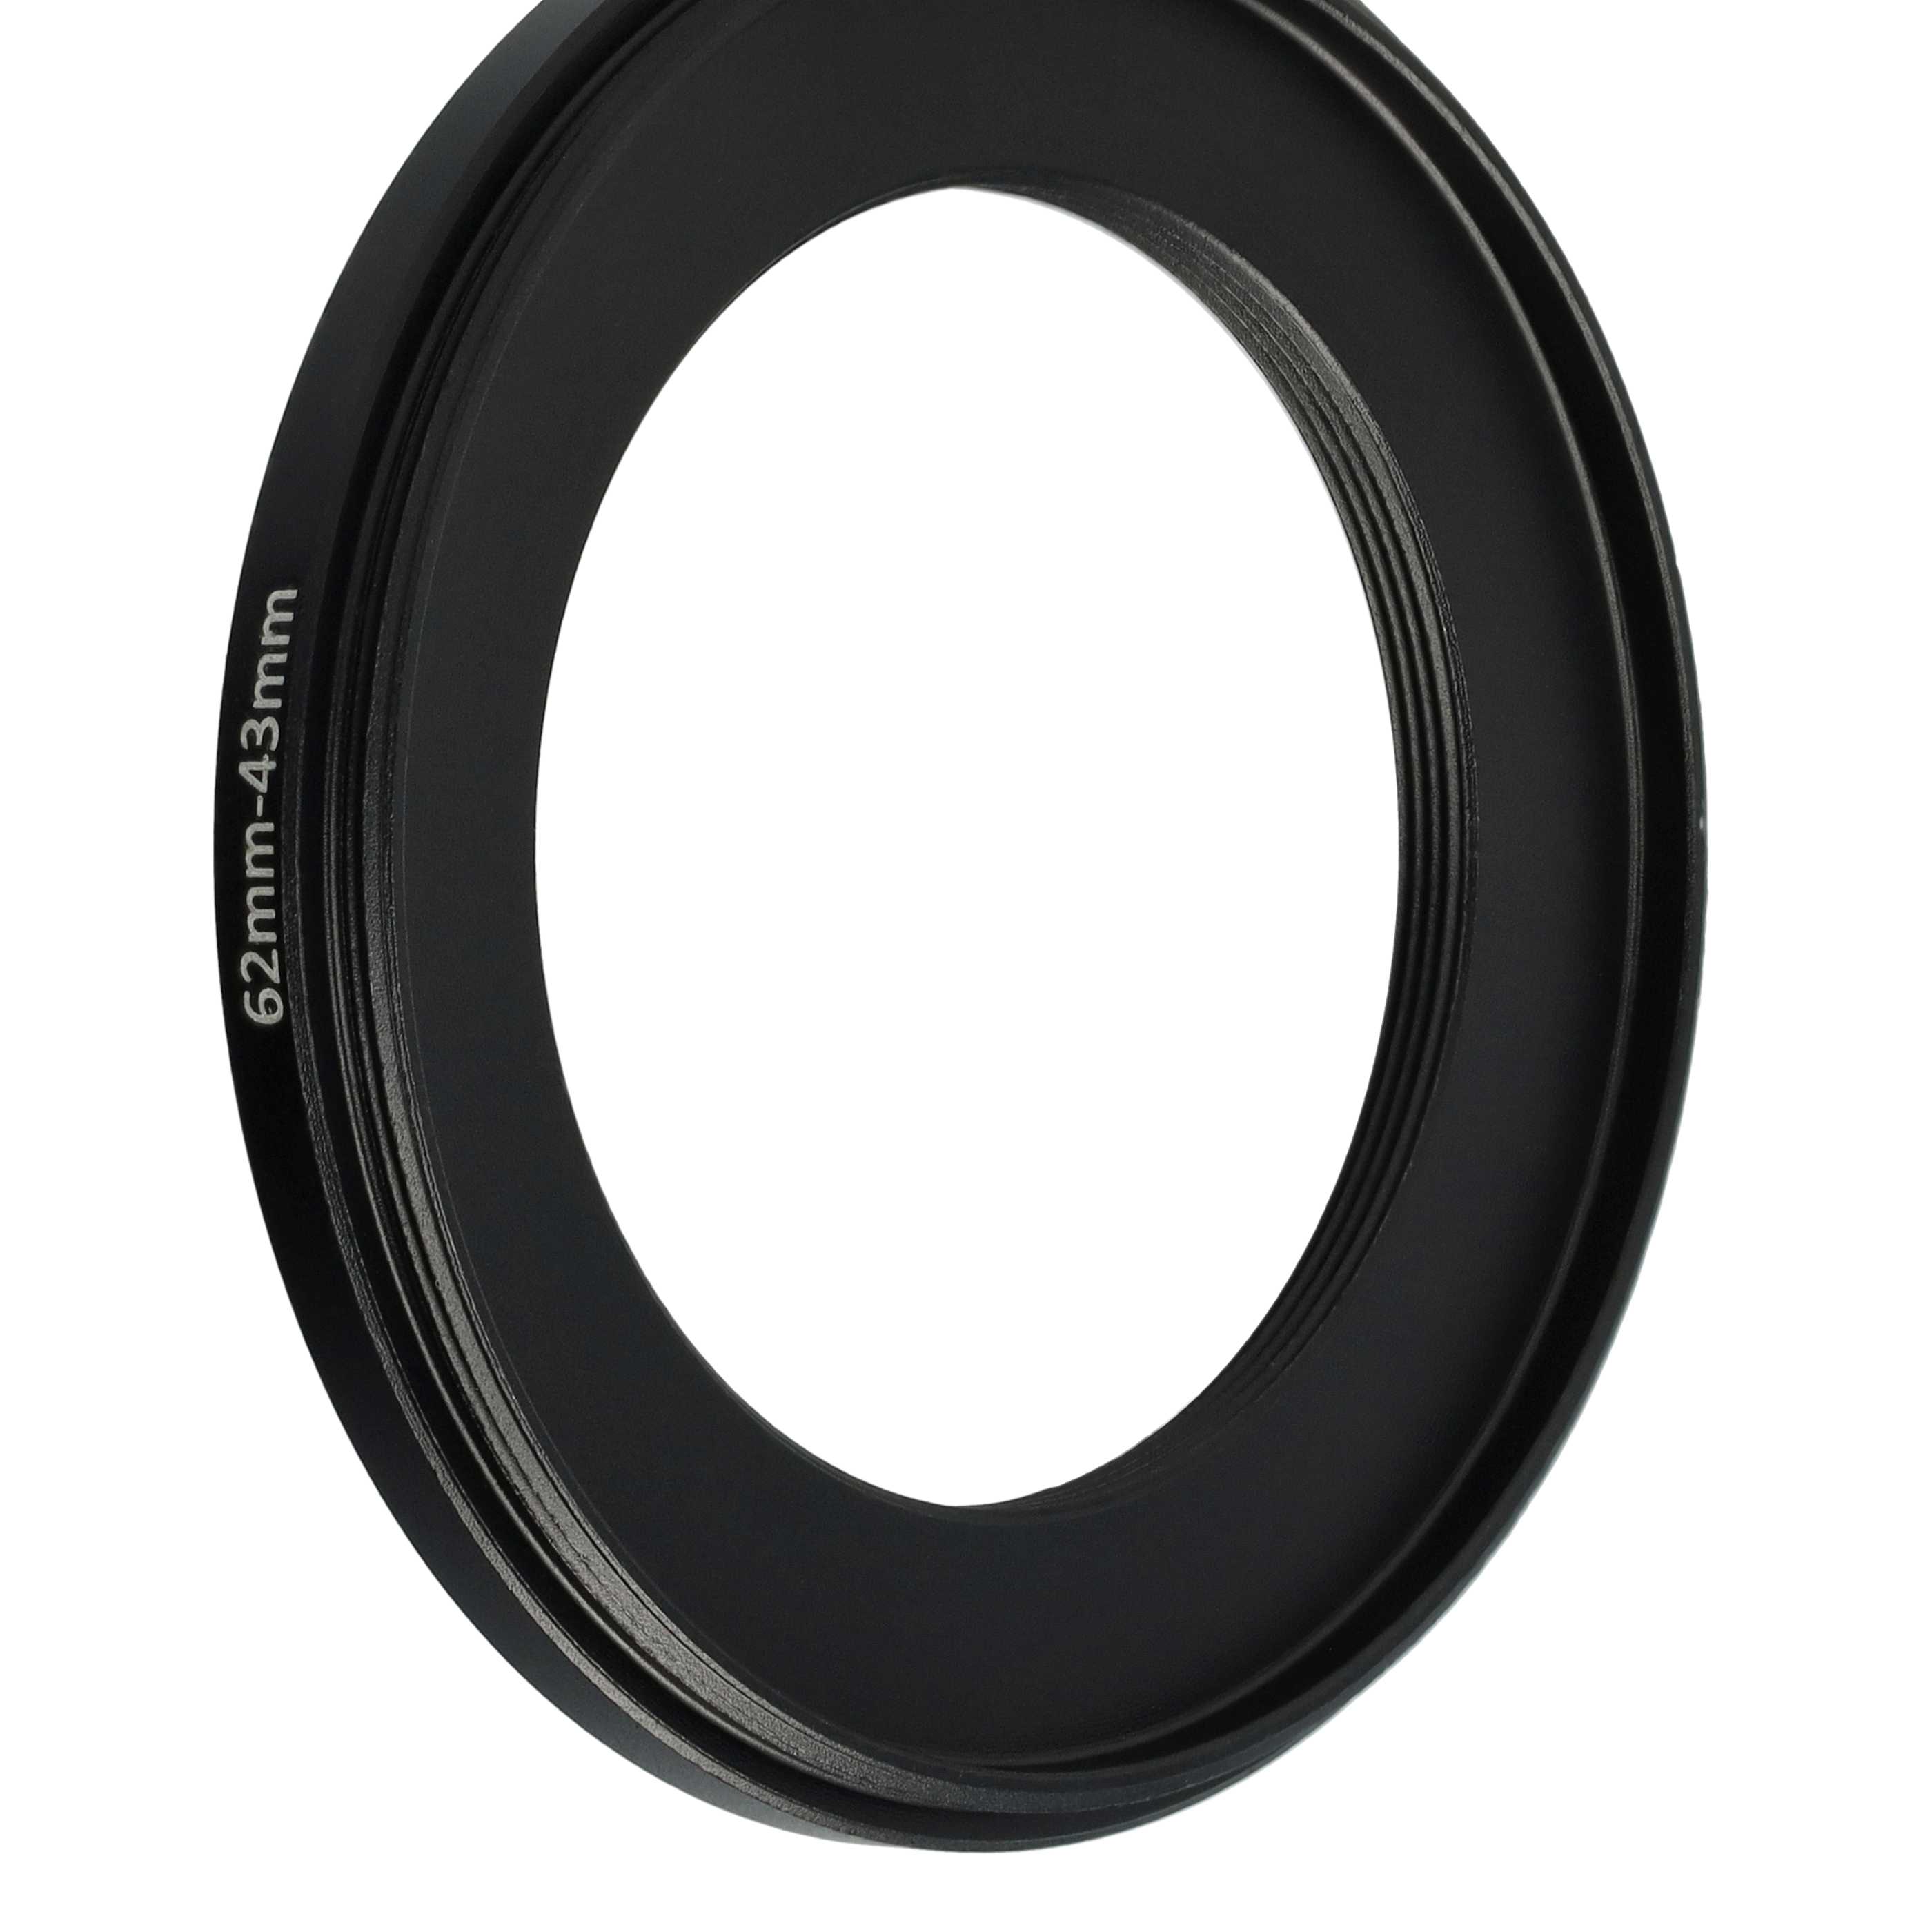 Step-Down Ring Adapter from 62 mm to 43 mm suitable for Camera Lens - Filter Adapter, metal